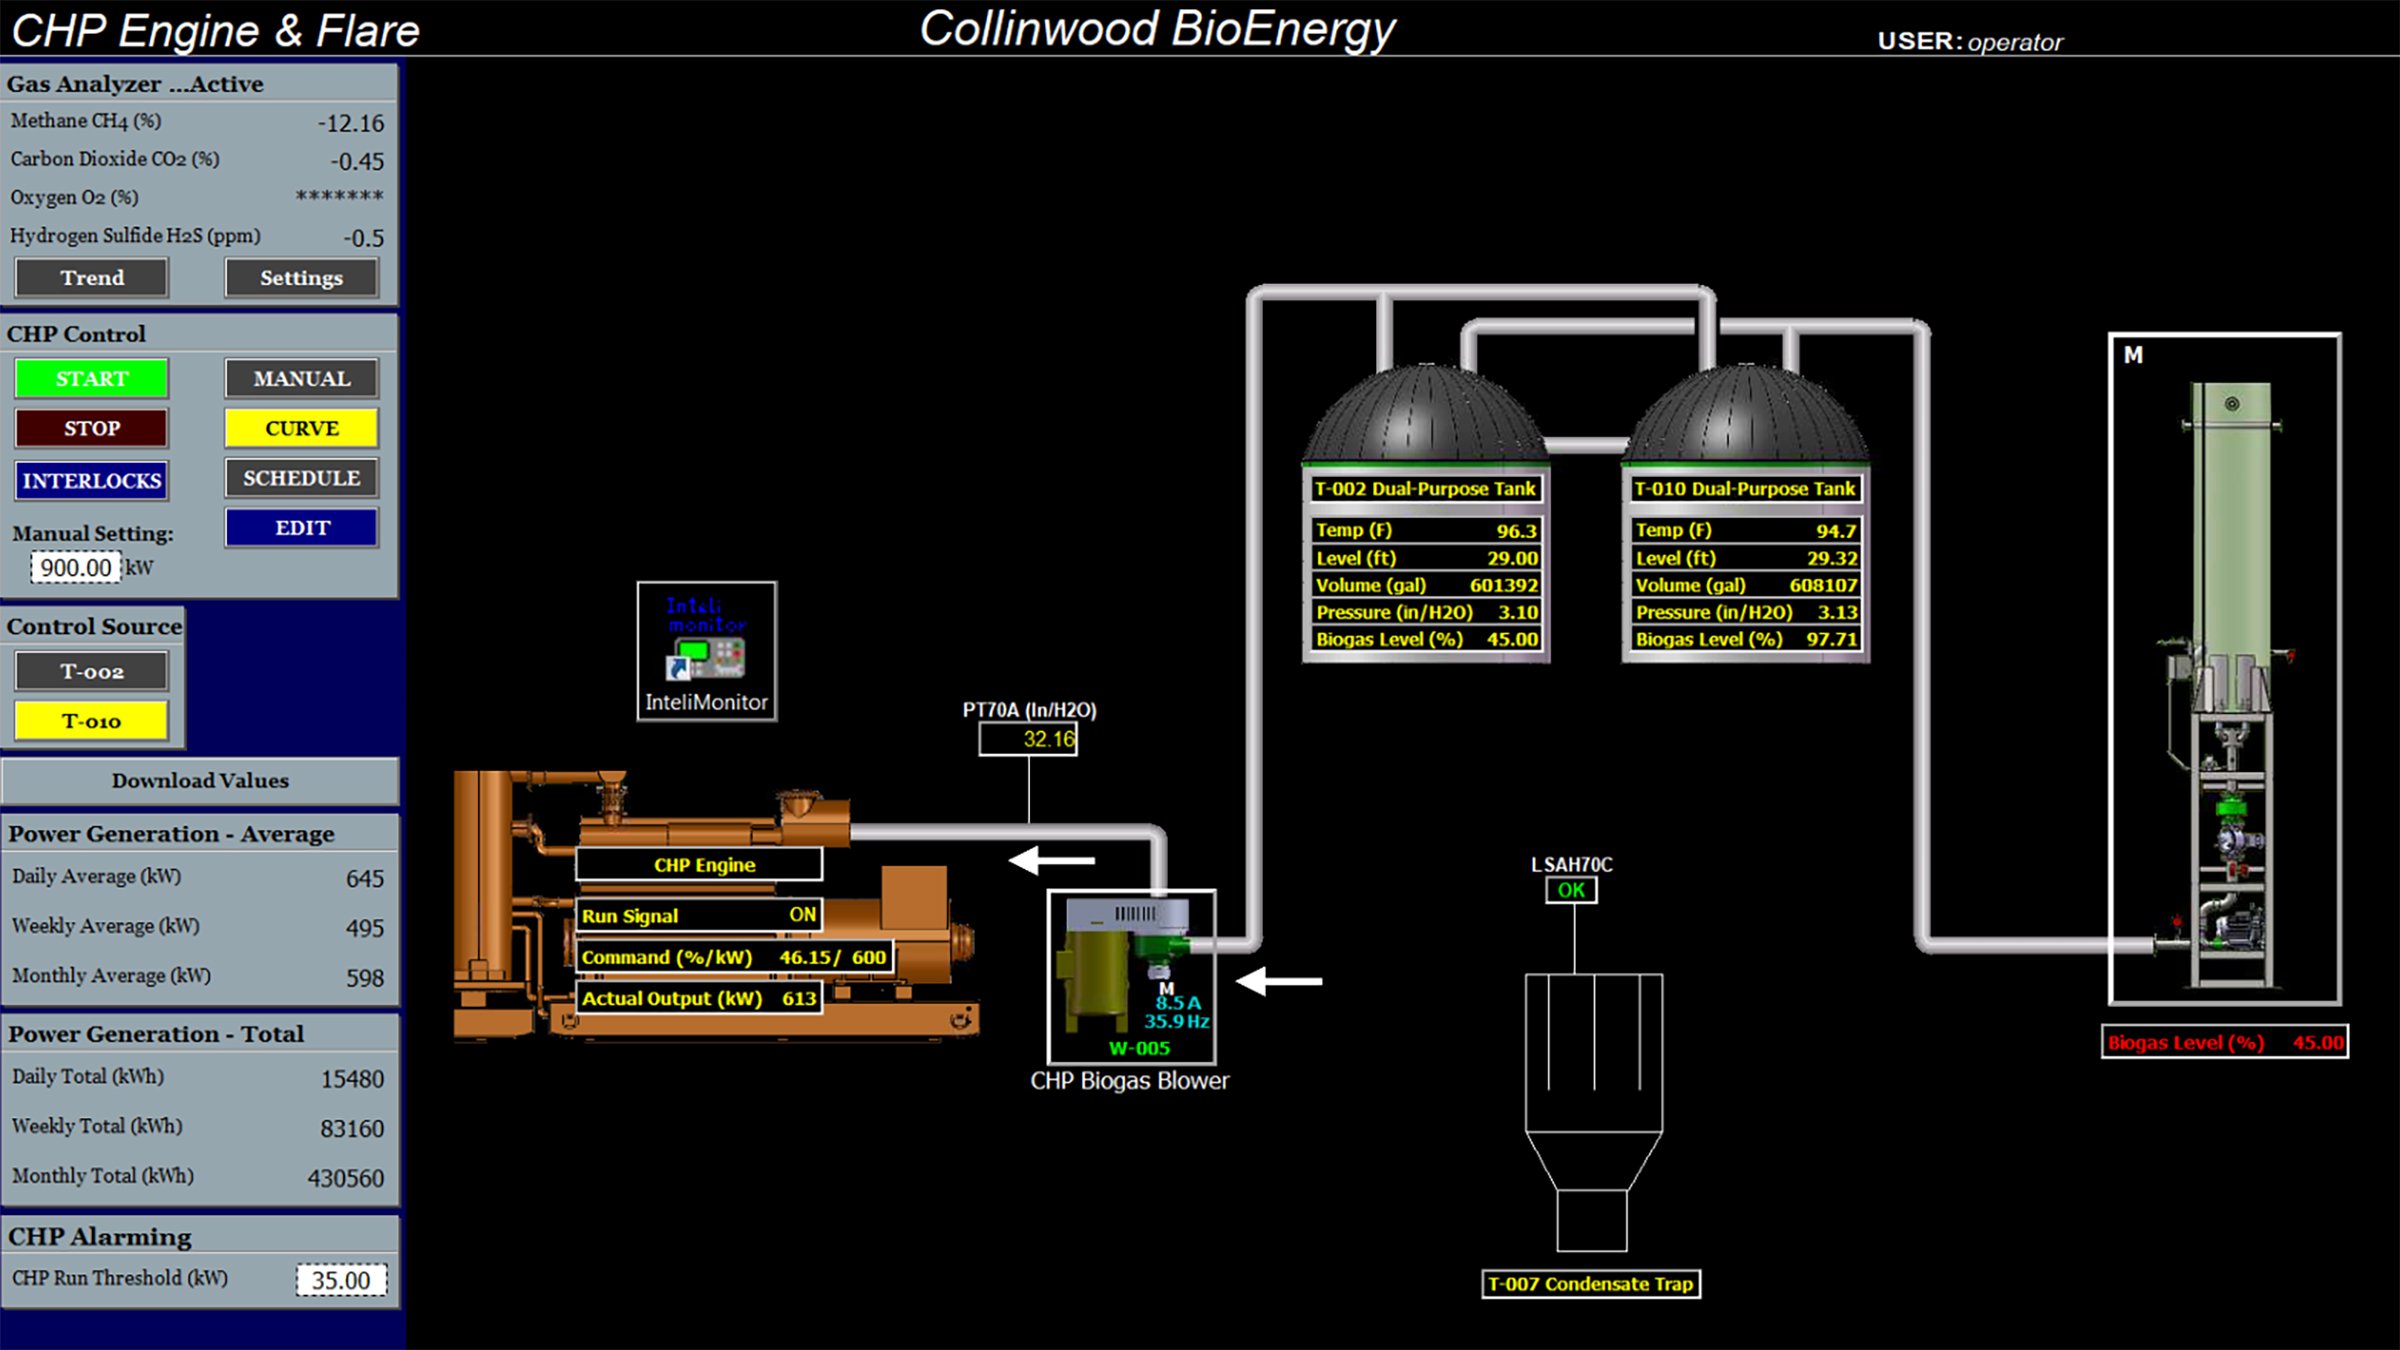 Screen shot of anaerobic digestion process at Quasar Energy Group in which biosolids are pumped into stirred tank reactors to be co-digested with outside organic waste.